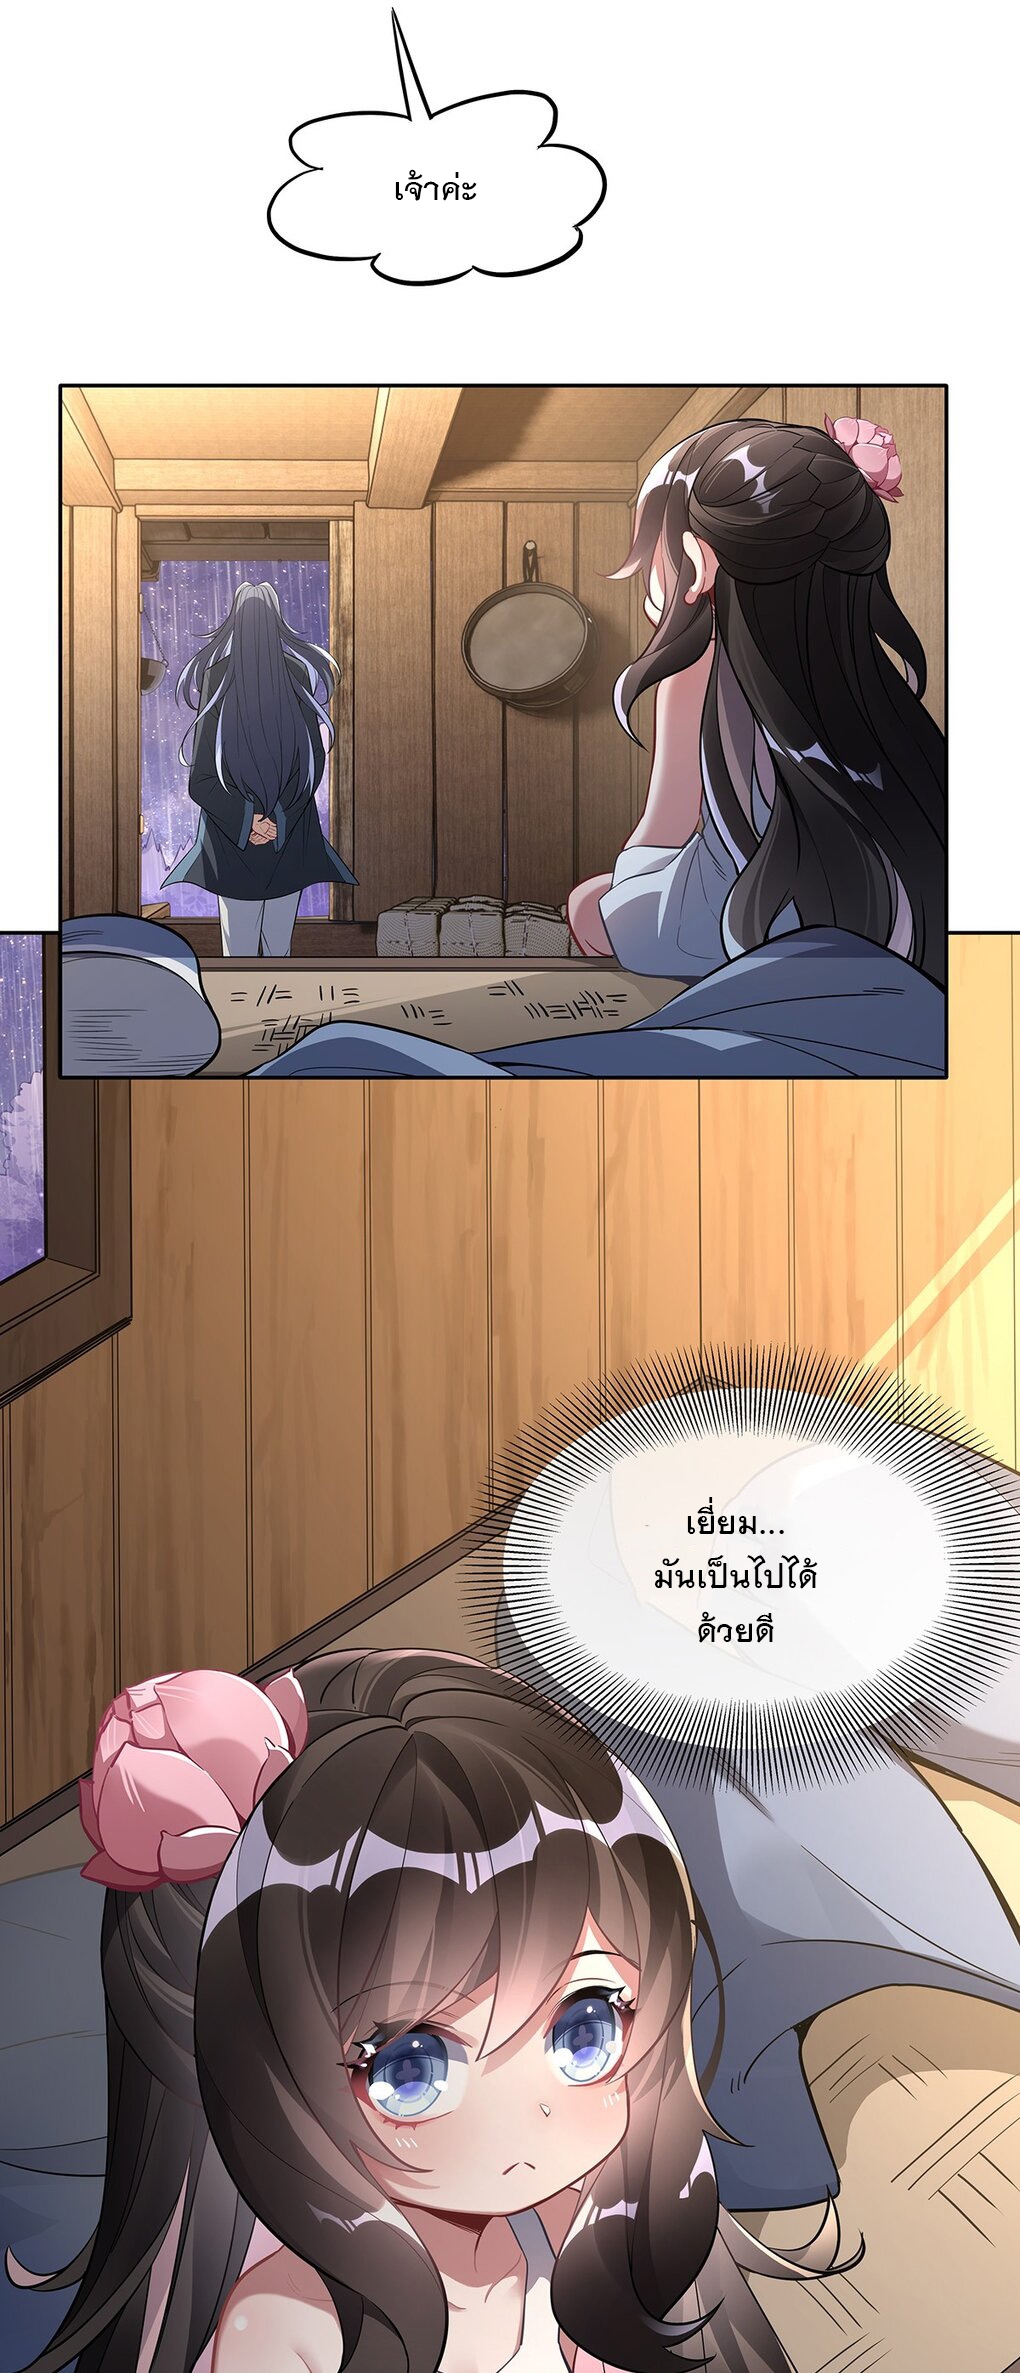 My Female Apprentices Are All Big Shots From the Future Ã Â¸â€¢Ã Â¸Â­Ã Â¸â„¢Ã Â¸â€”Ã Â¸ÂµÃ Â¹Ë† 94 (51)